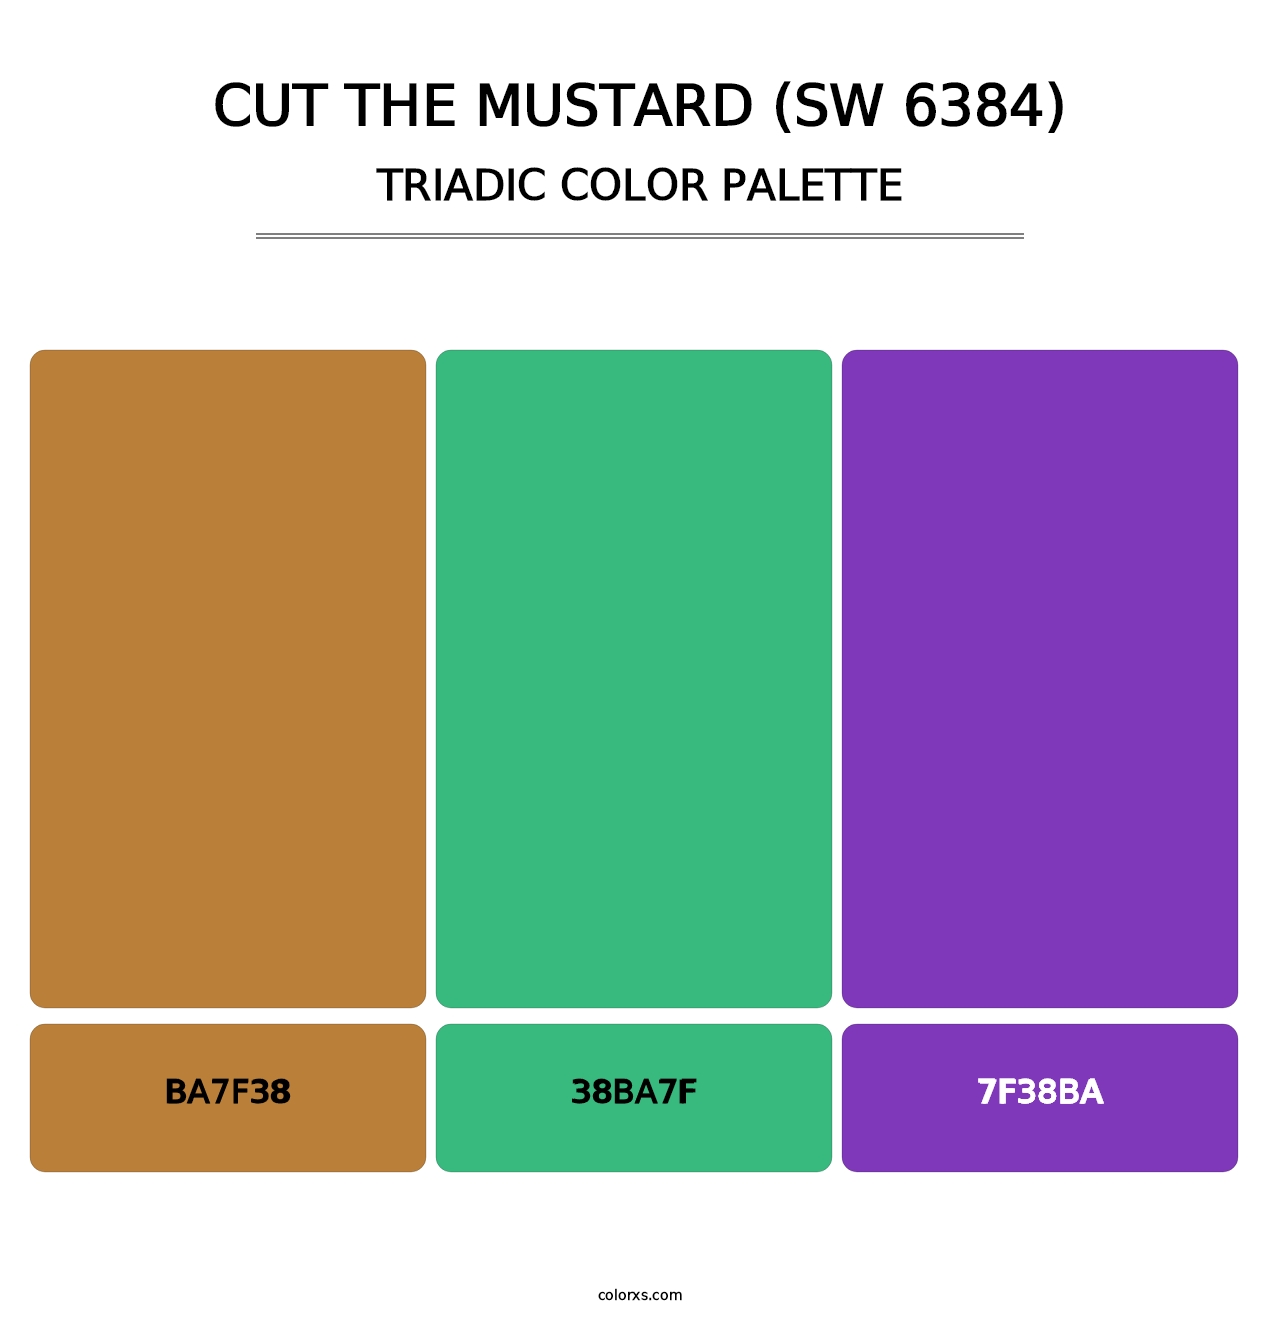 Cut the Mustard (SW 6384) - Triadic Color Palette